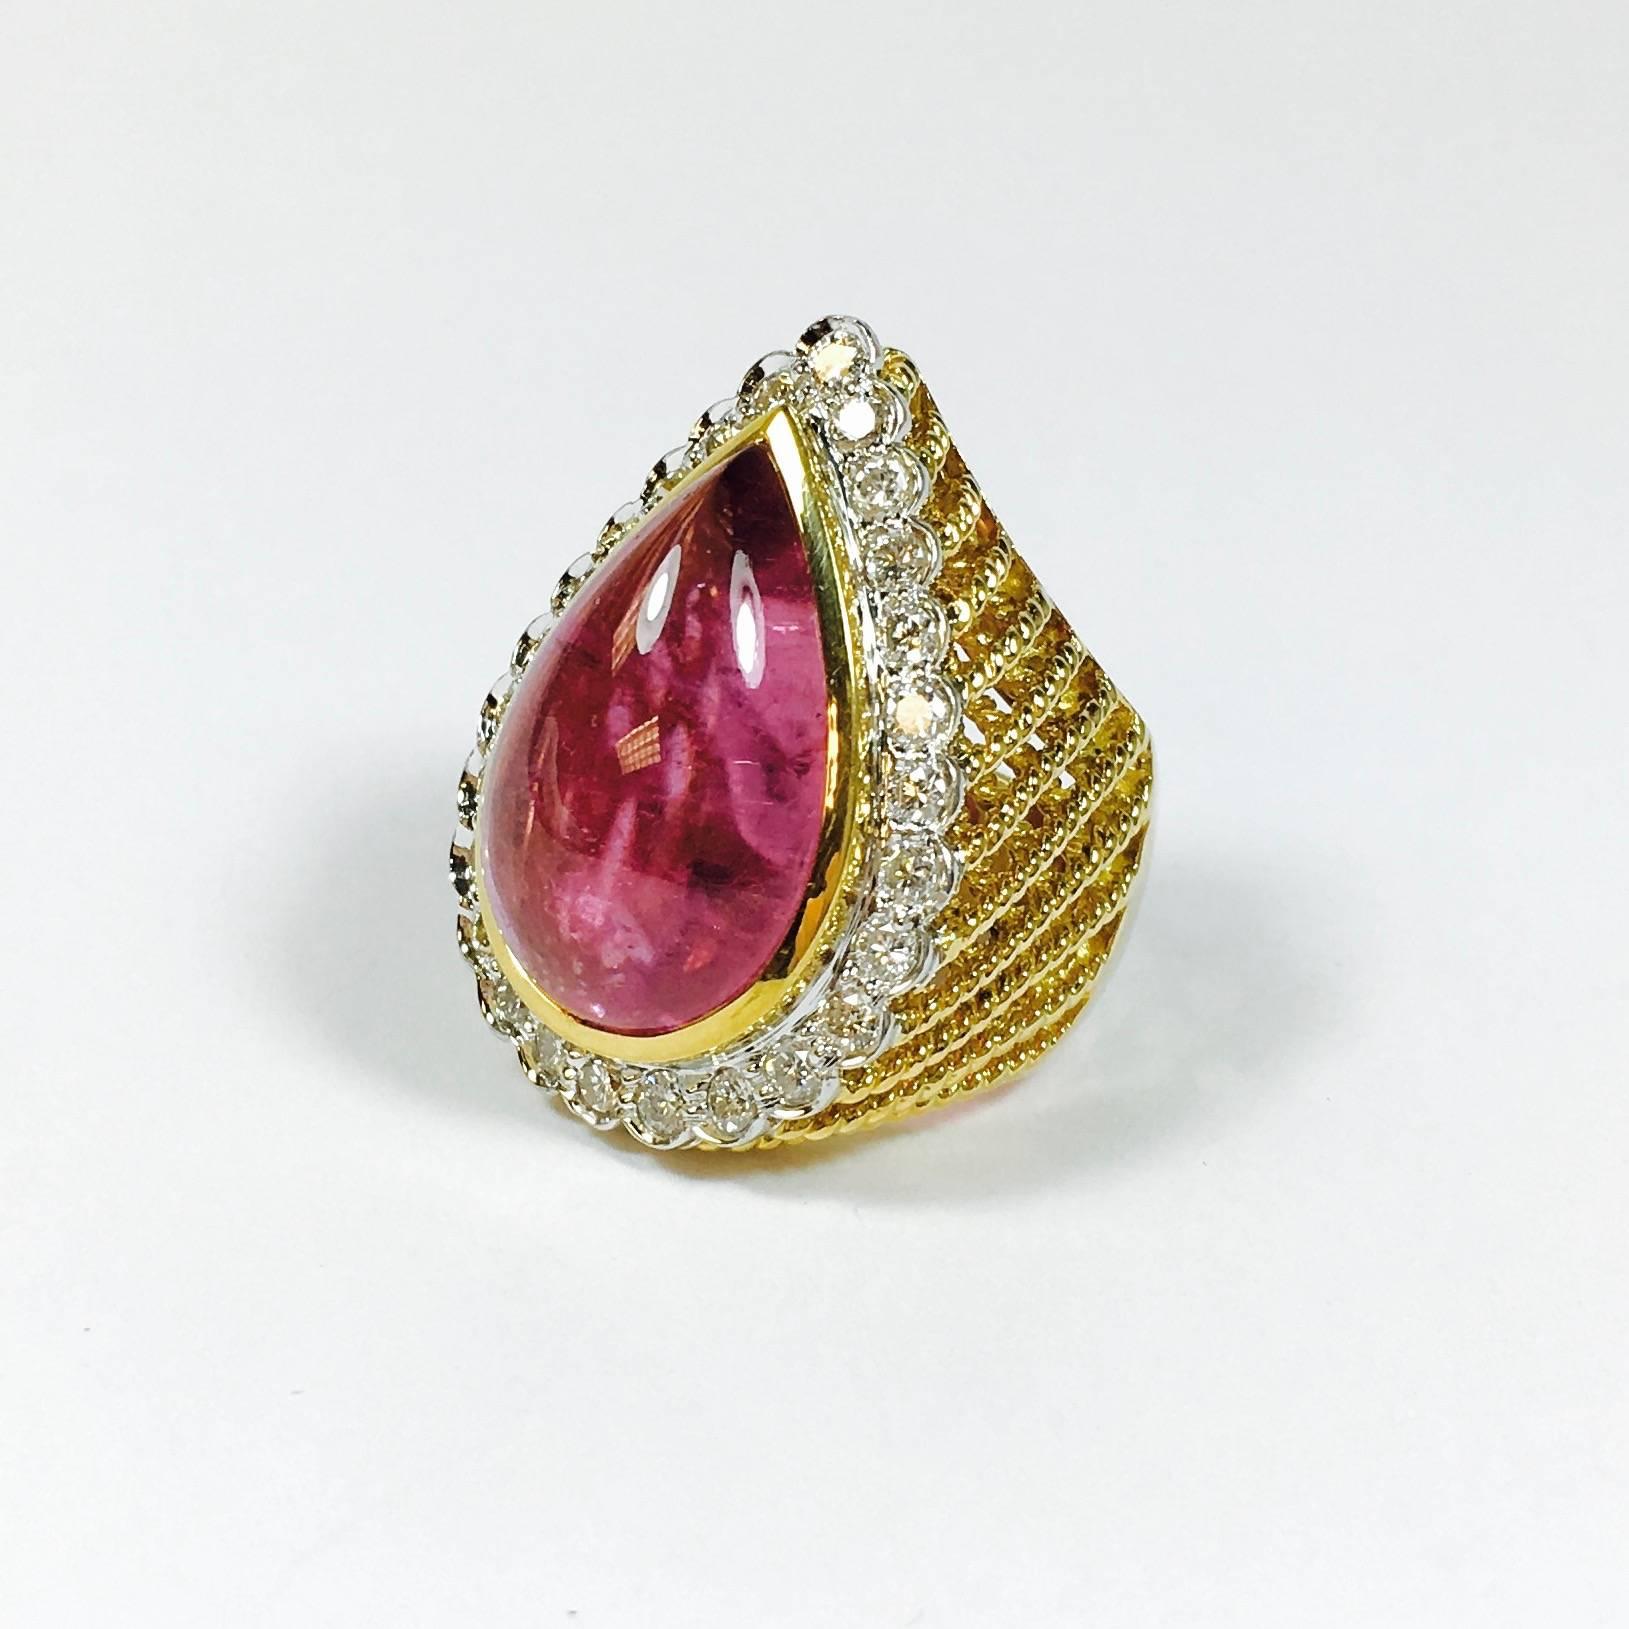 This beauty features a teardrop shaped 22 x 14 mm, approximately 20ct pink tourmaline cabochon set within a bezel of diamonds, supported by lattice design gold gallery, completed by a 6 mm wide gold band. 14K gold. Excellent workmanship. 
26 round